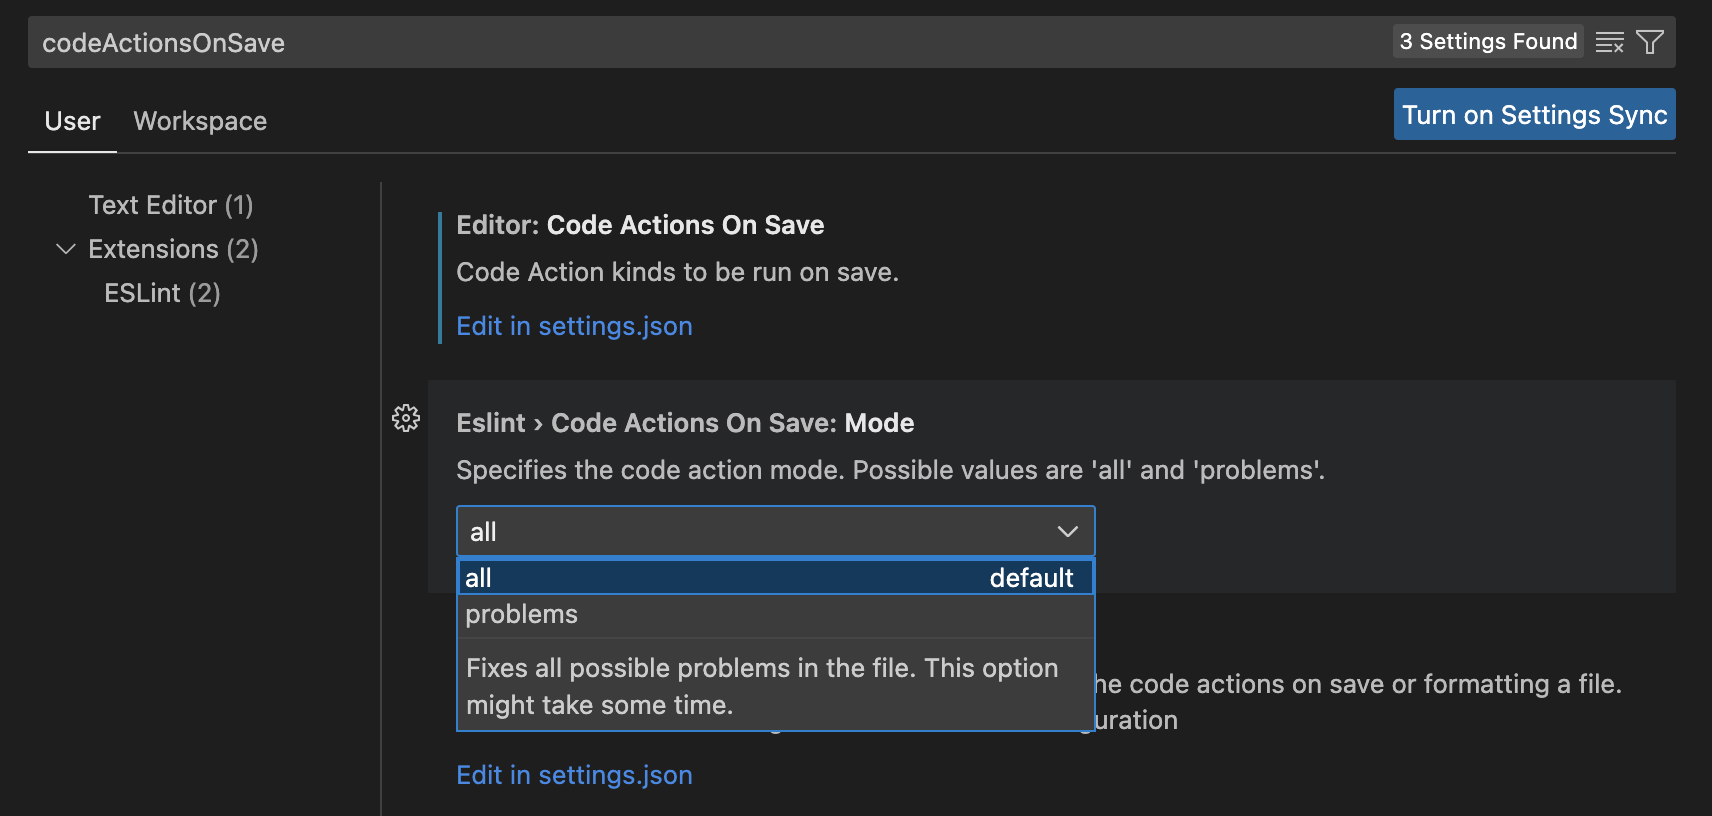 Enable "Format On Save"